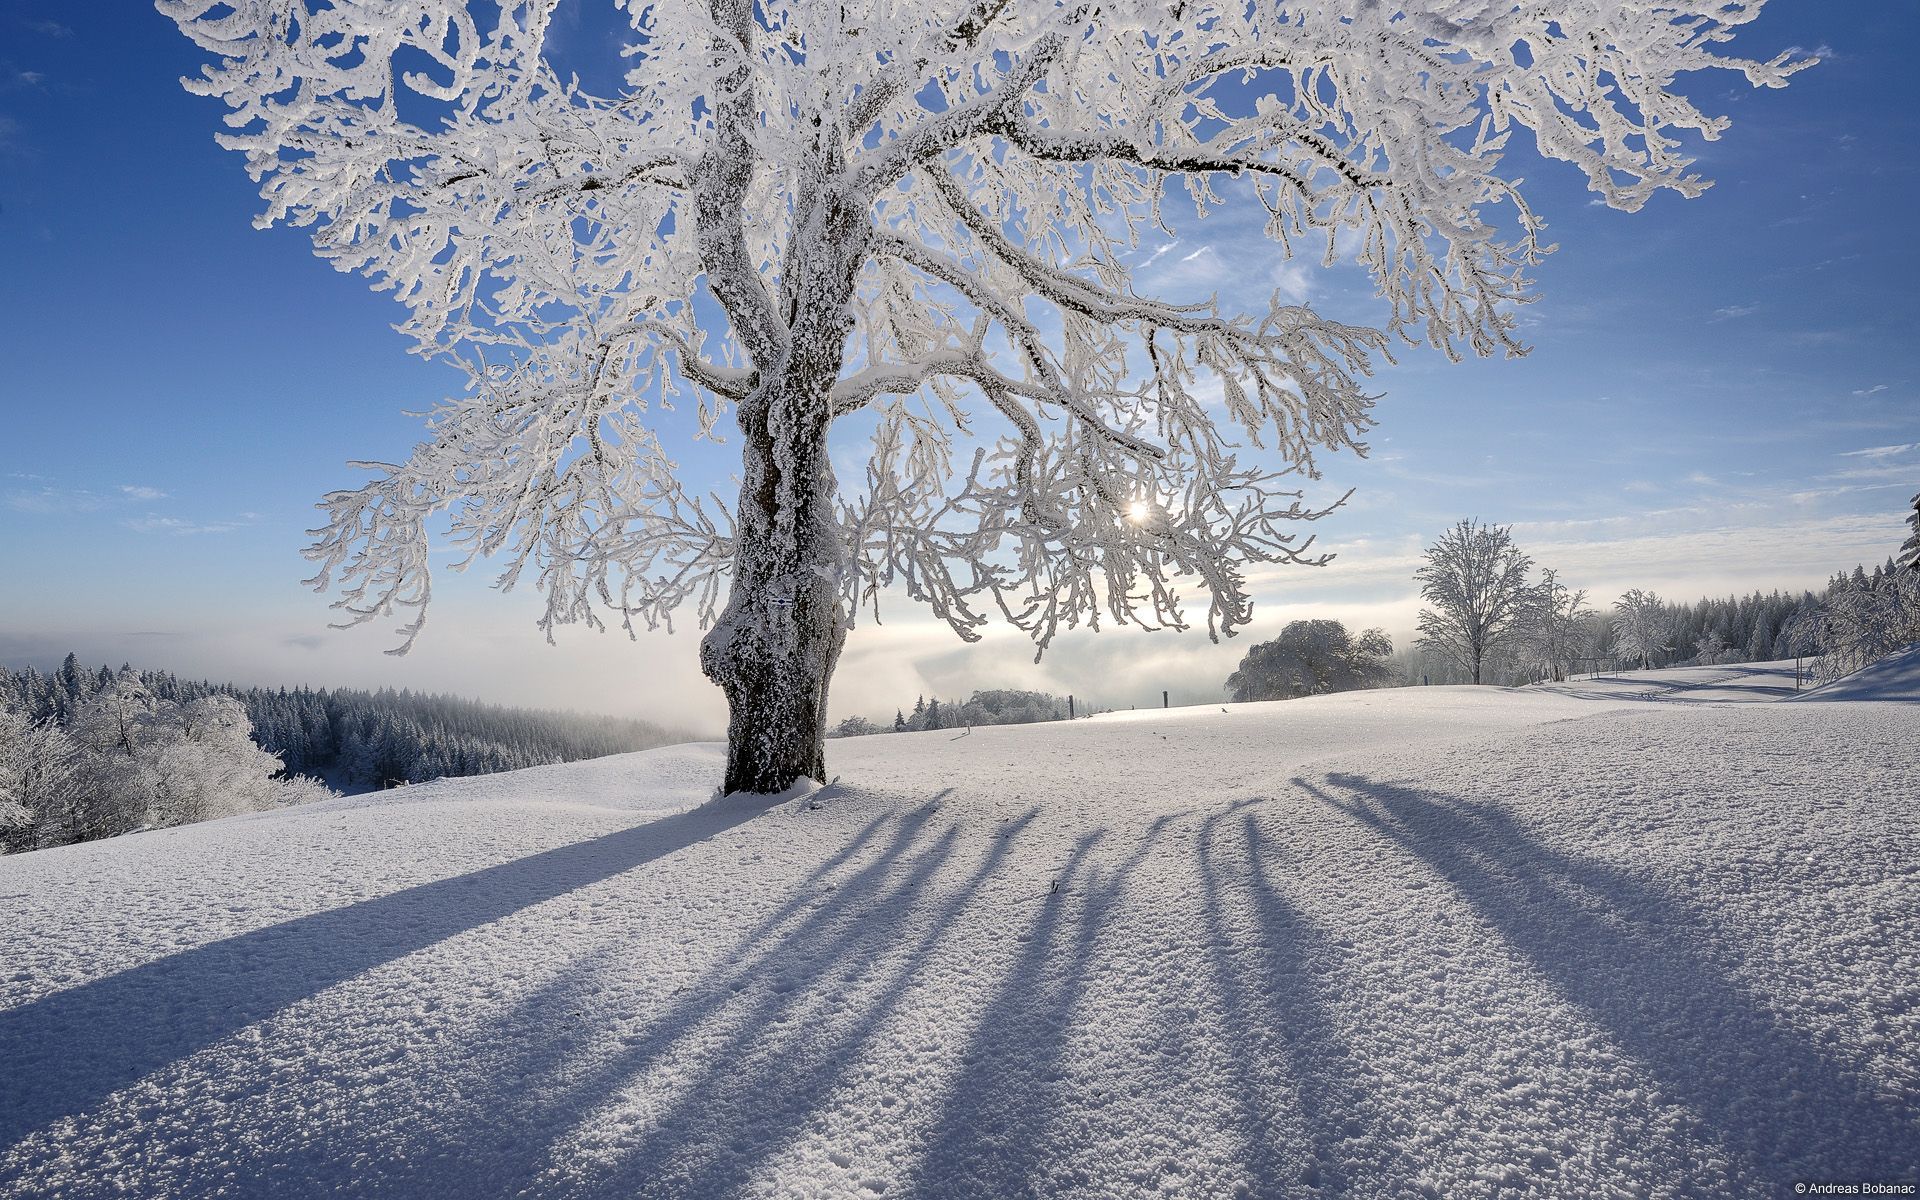 Winter and Christmas desktop backgrounds HD Backgrounds